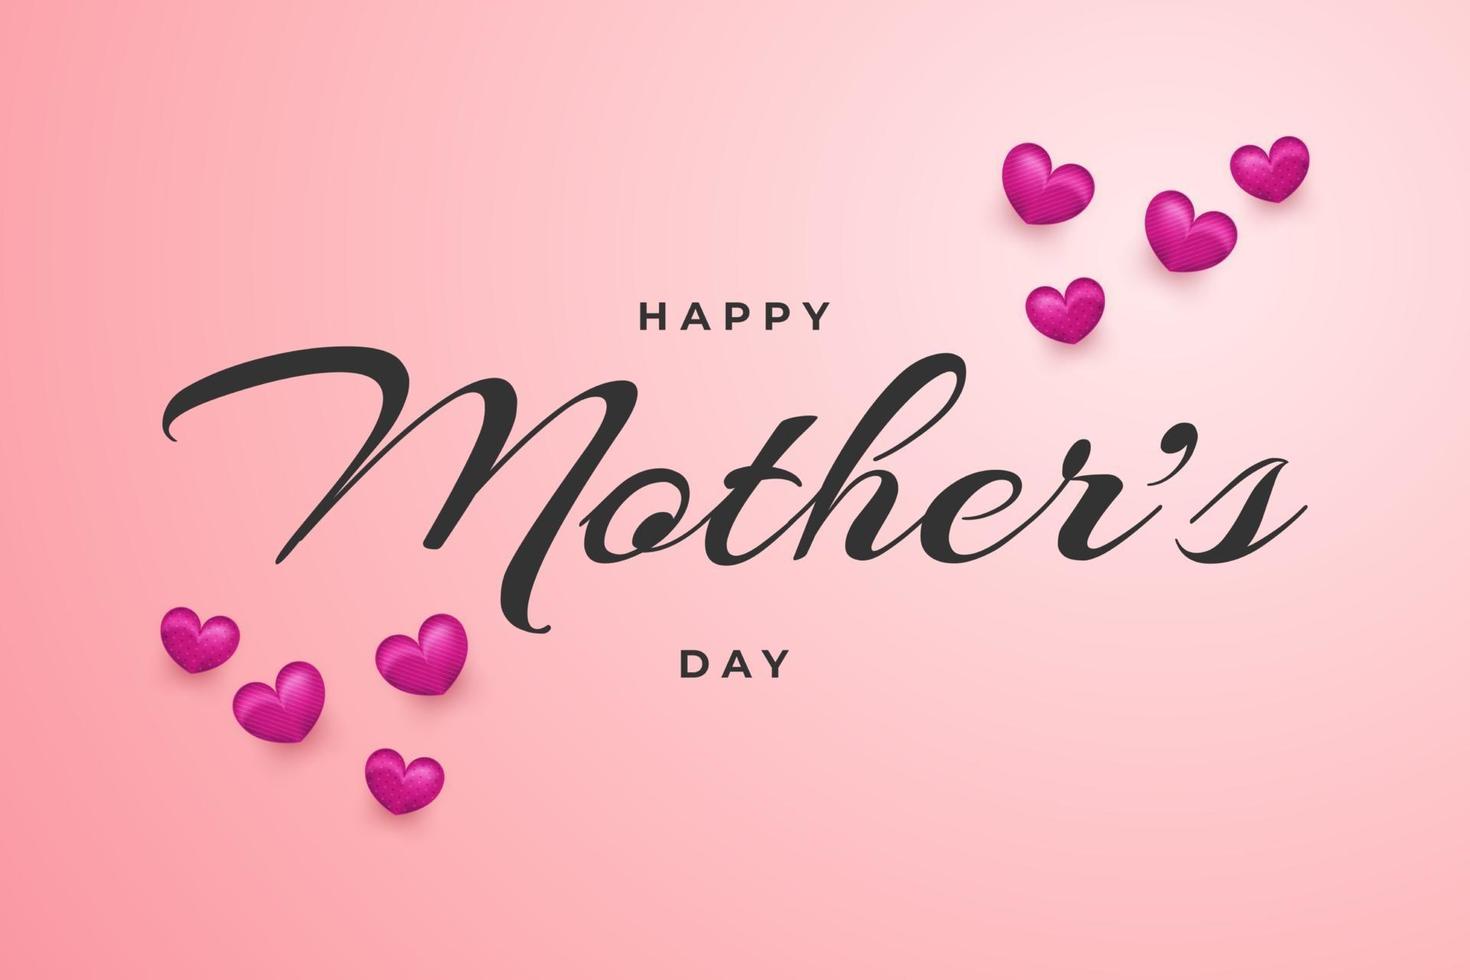 Mothers Day Greeting Card with Hearts Isolated on Pink Background vector